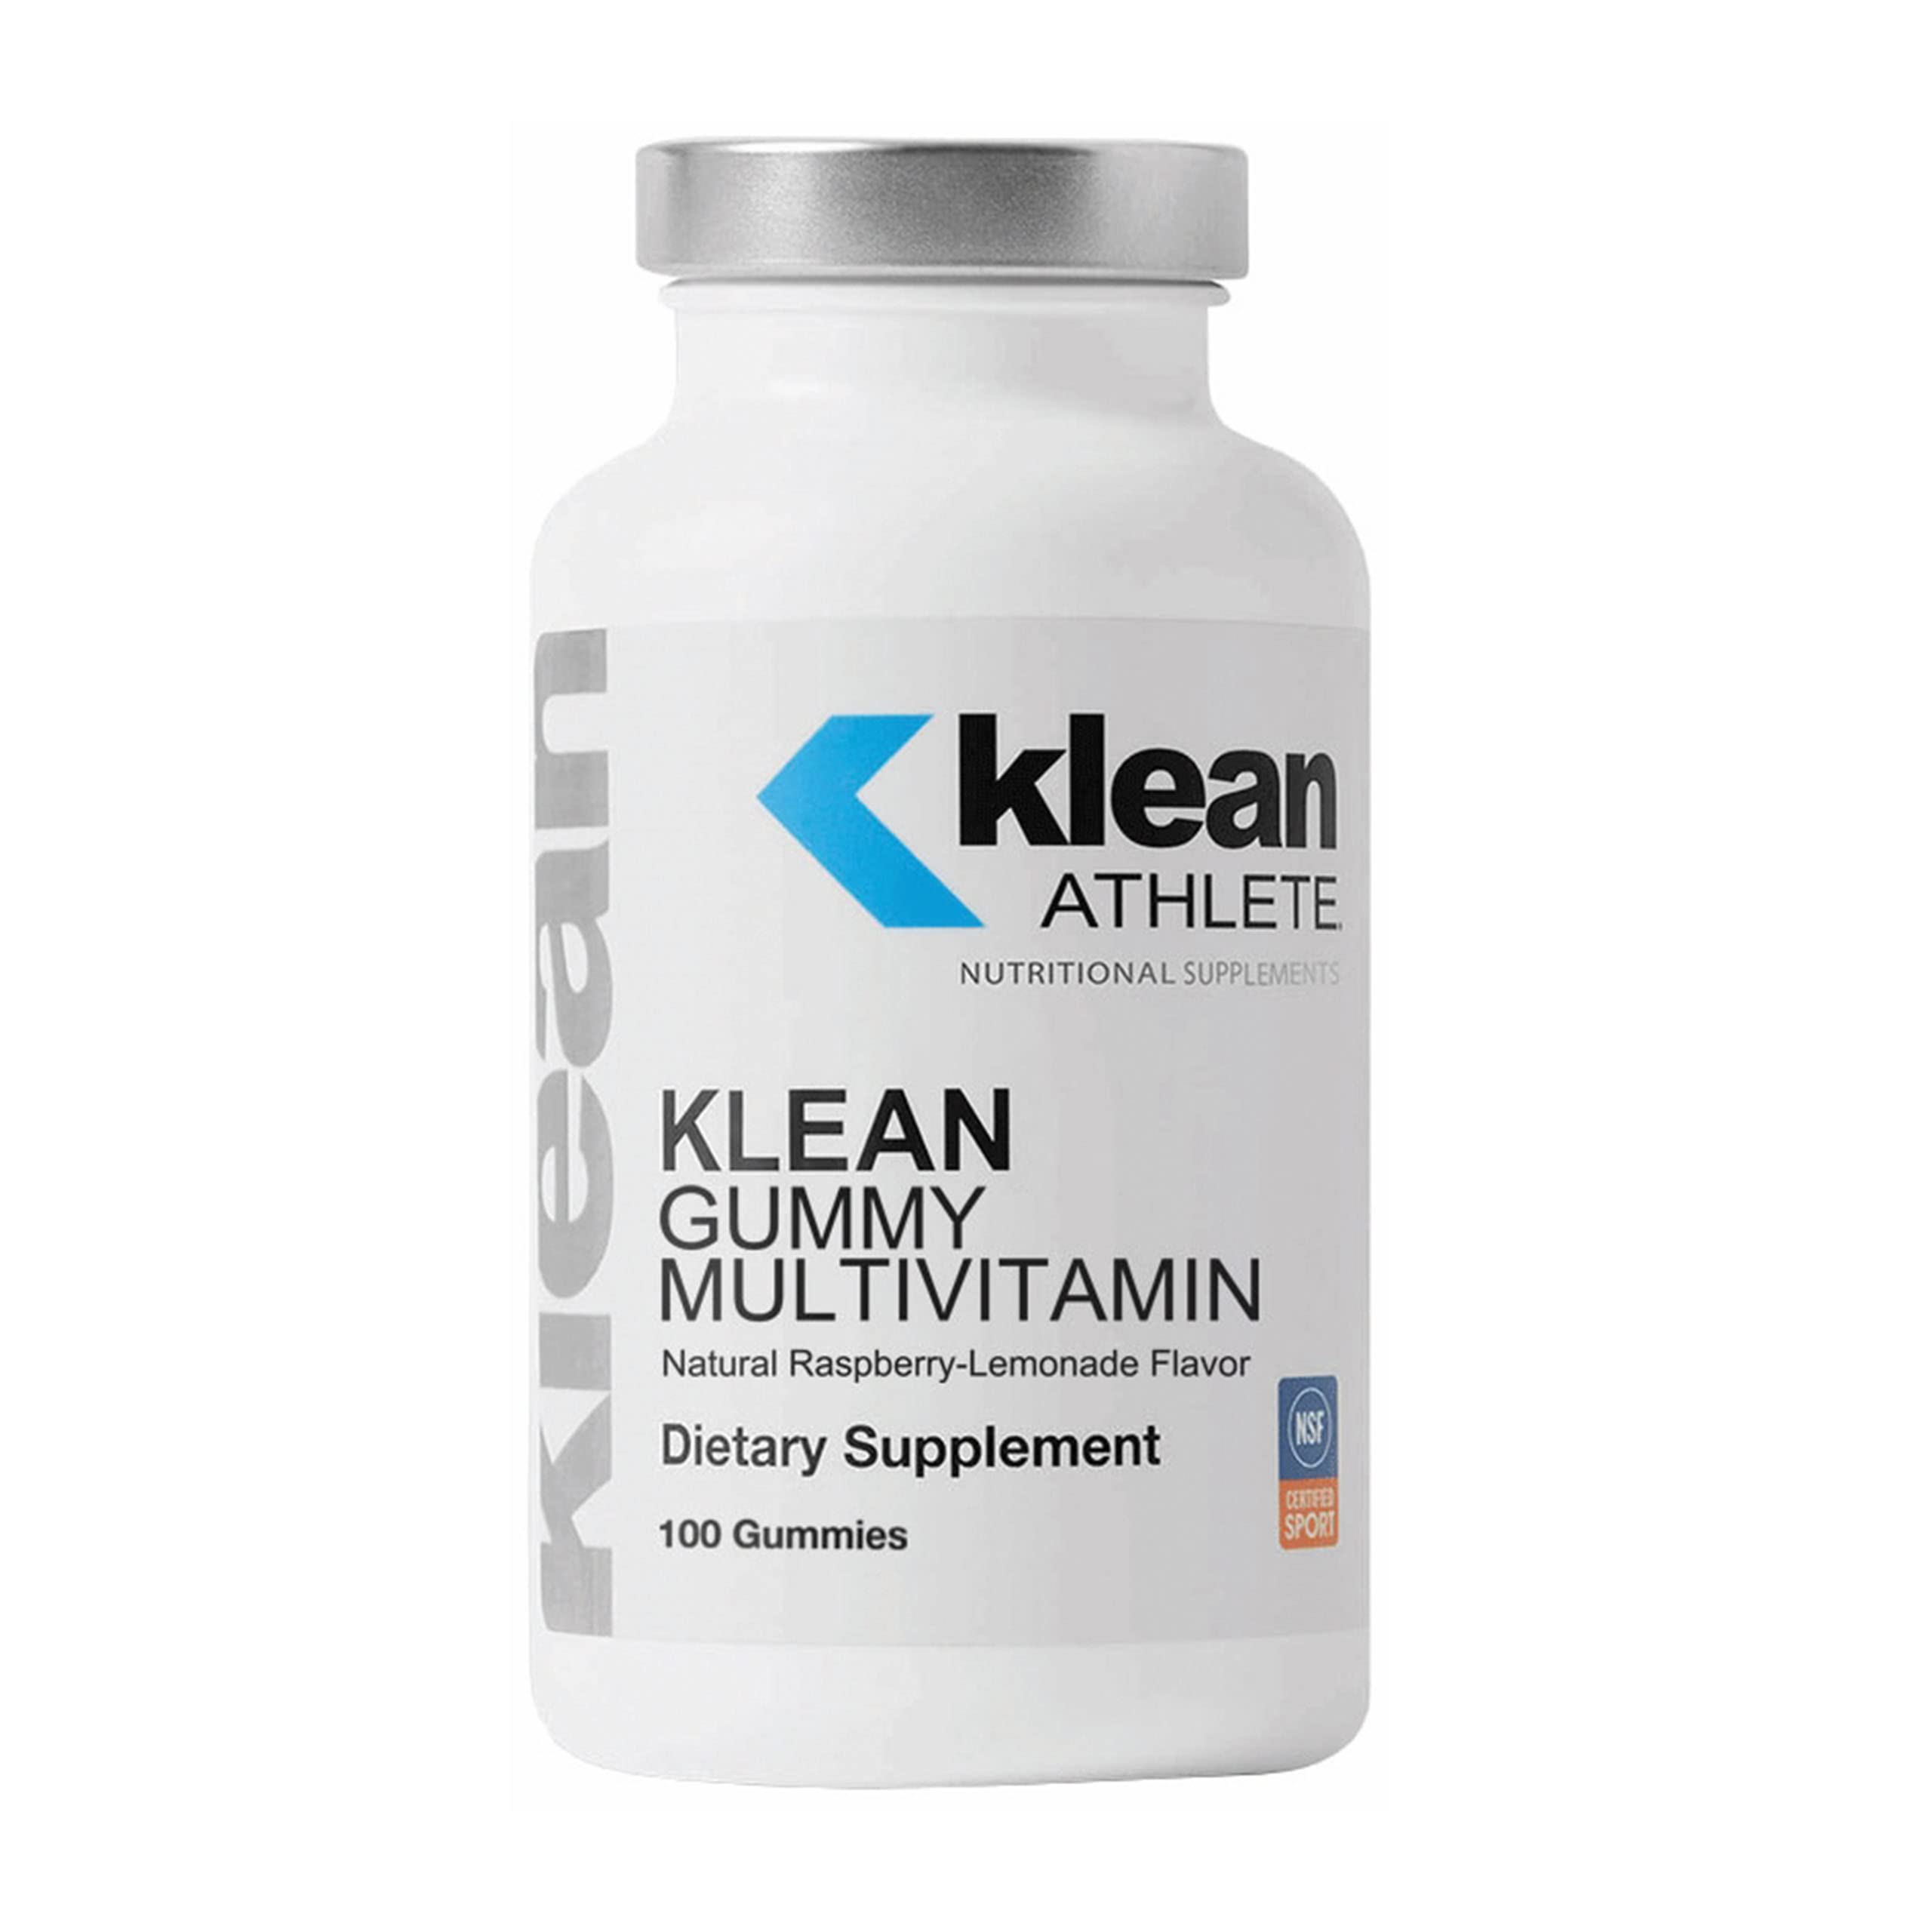 Multivitamin supplements for athletes